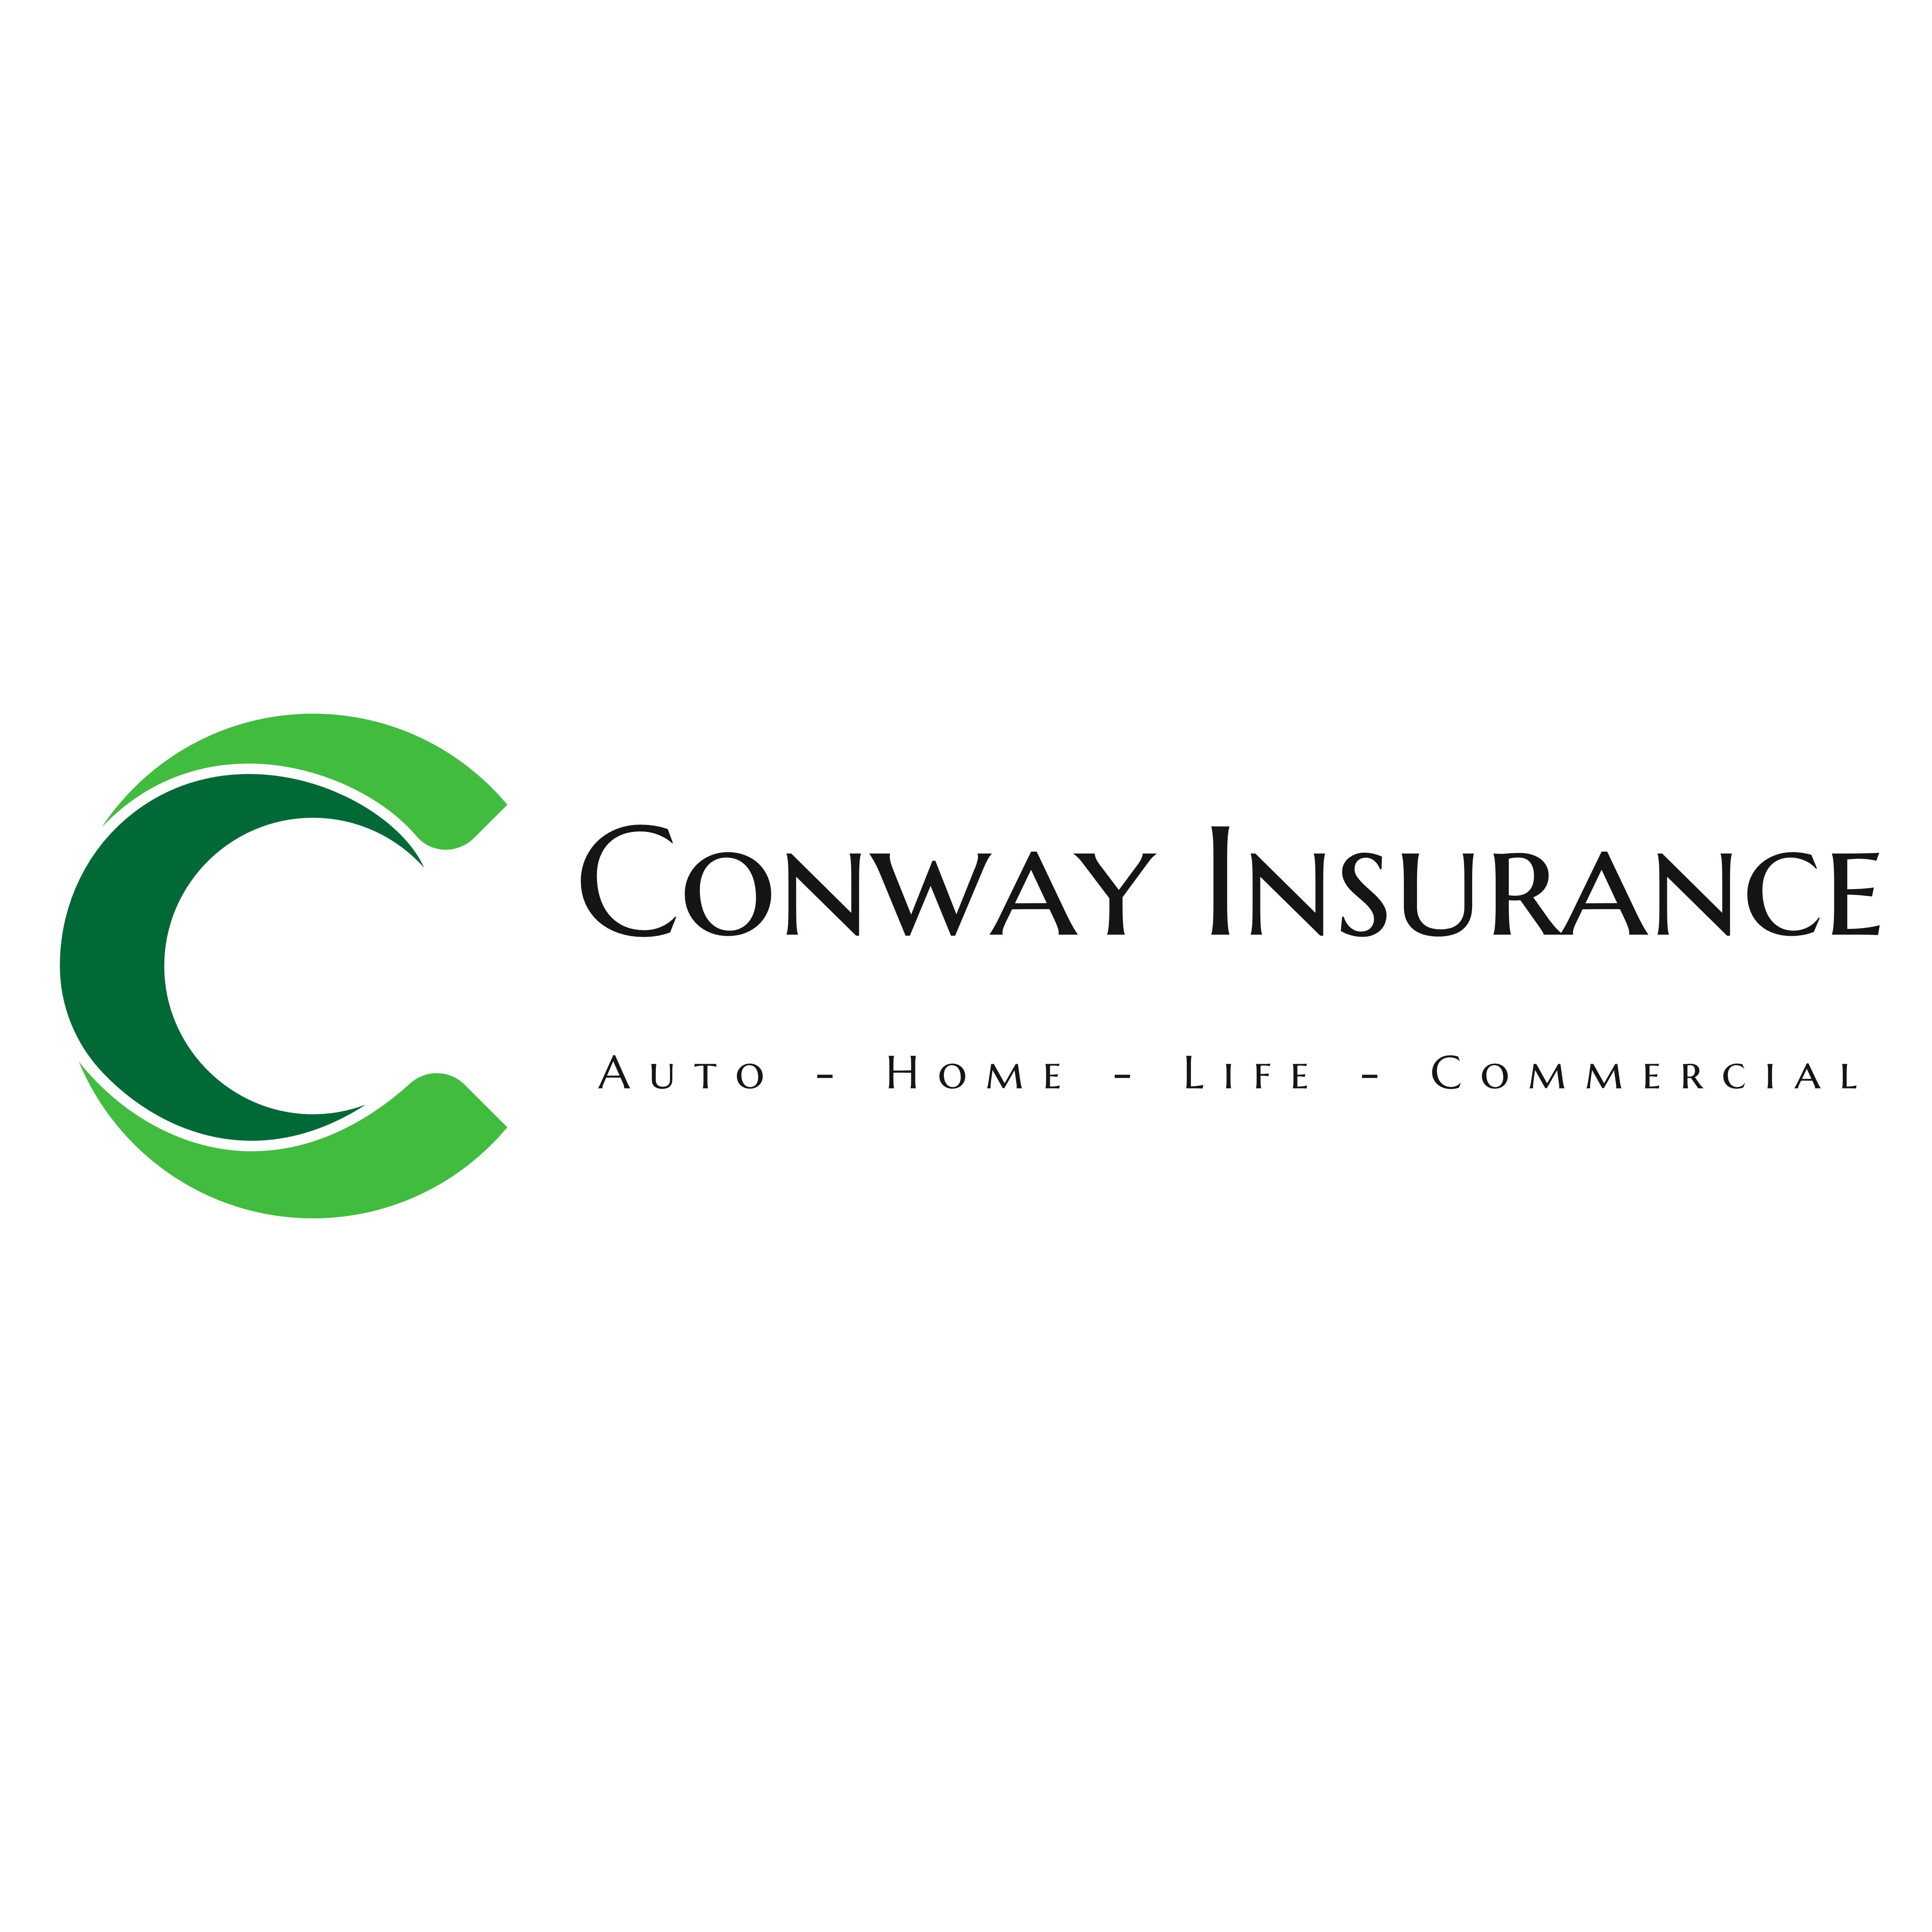 Home Insurance in Midwest City, Oklahoma